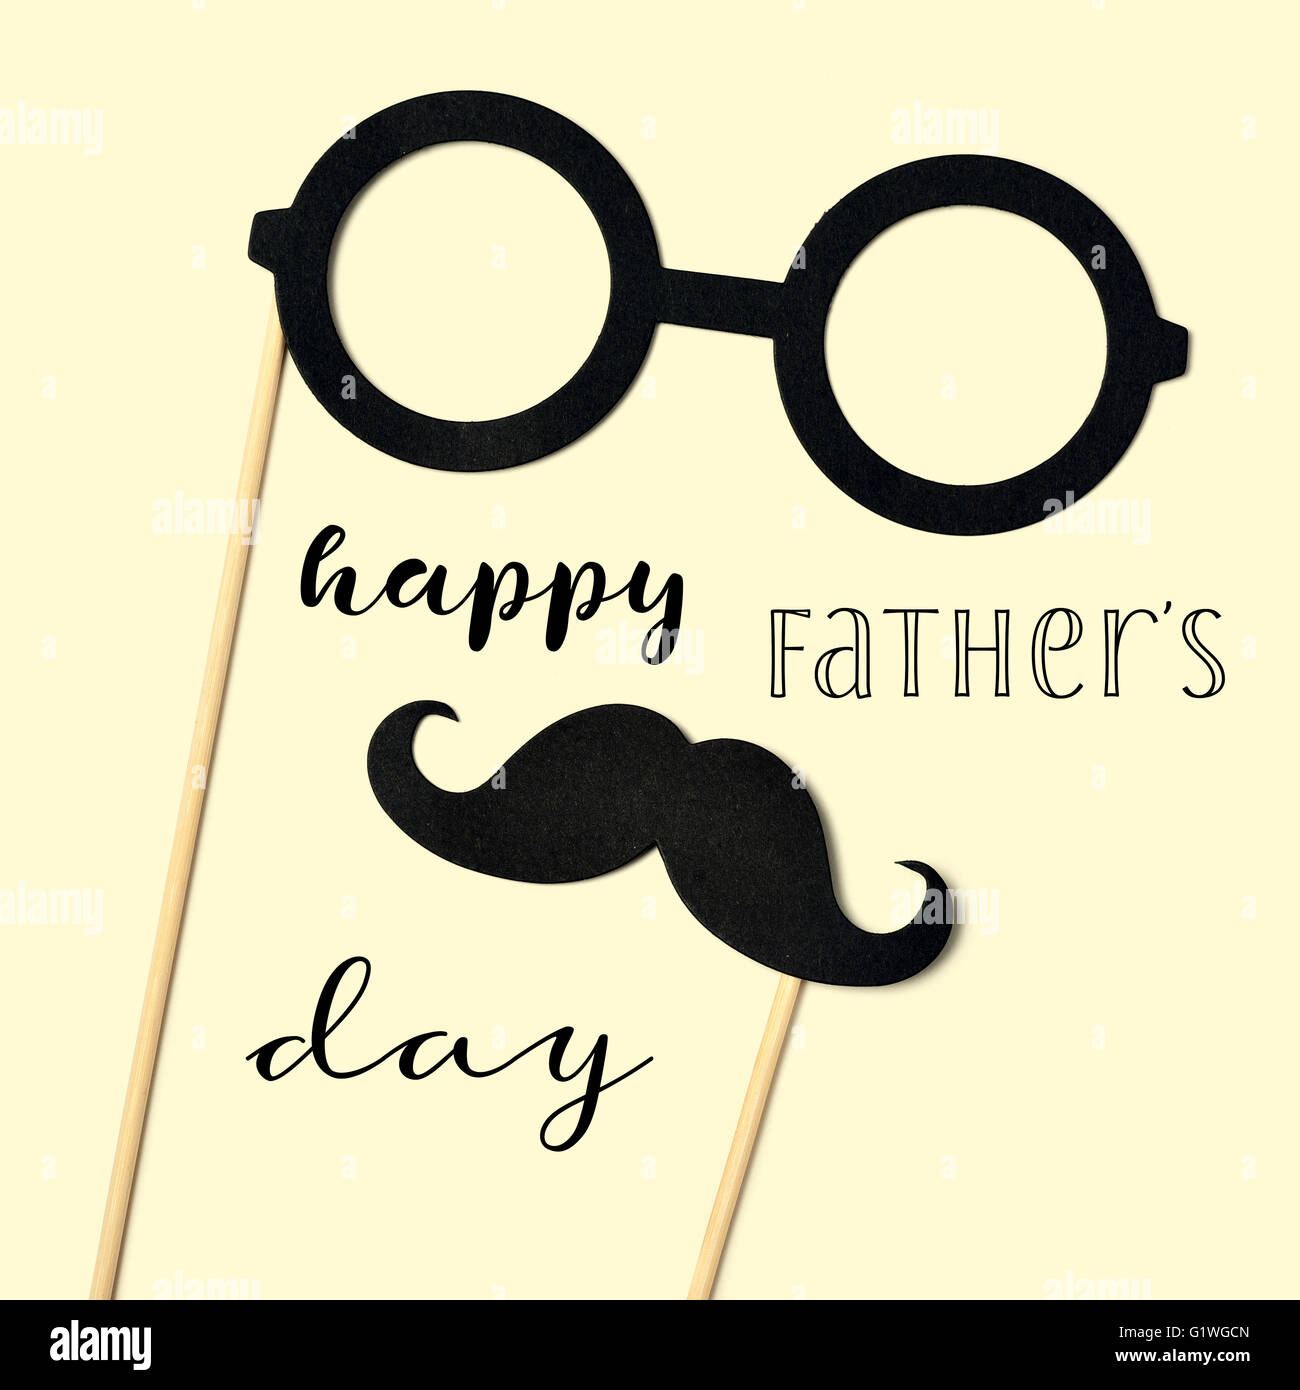 the text happy fathers day and a pair of round-framed eyeglasses and a mustache attached to handles depicting a man face, on a b Stock Photo